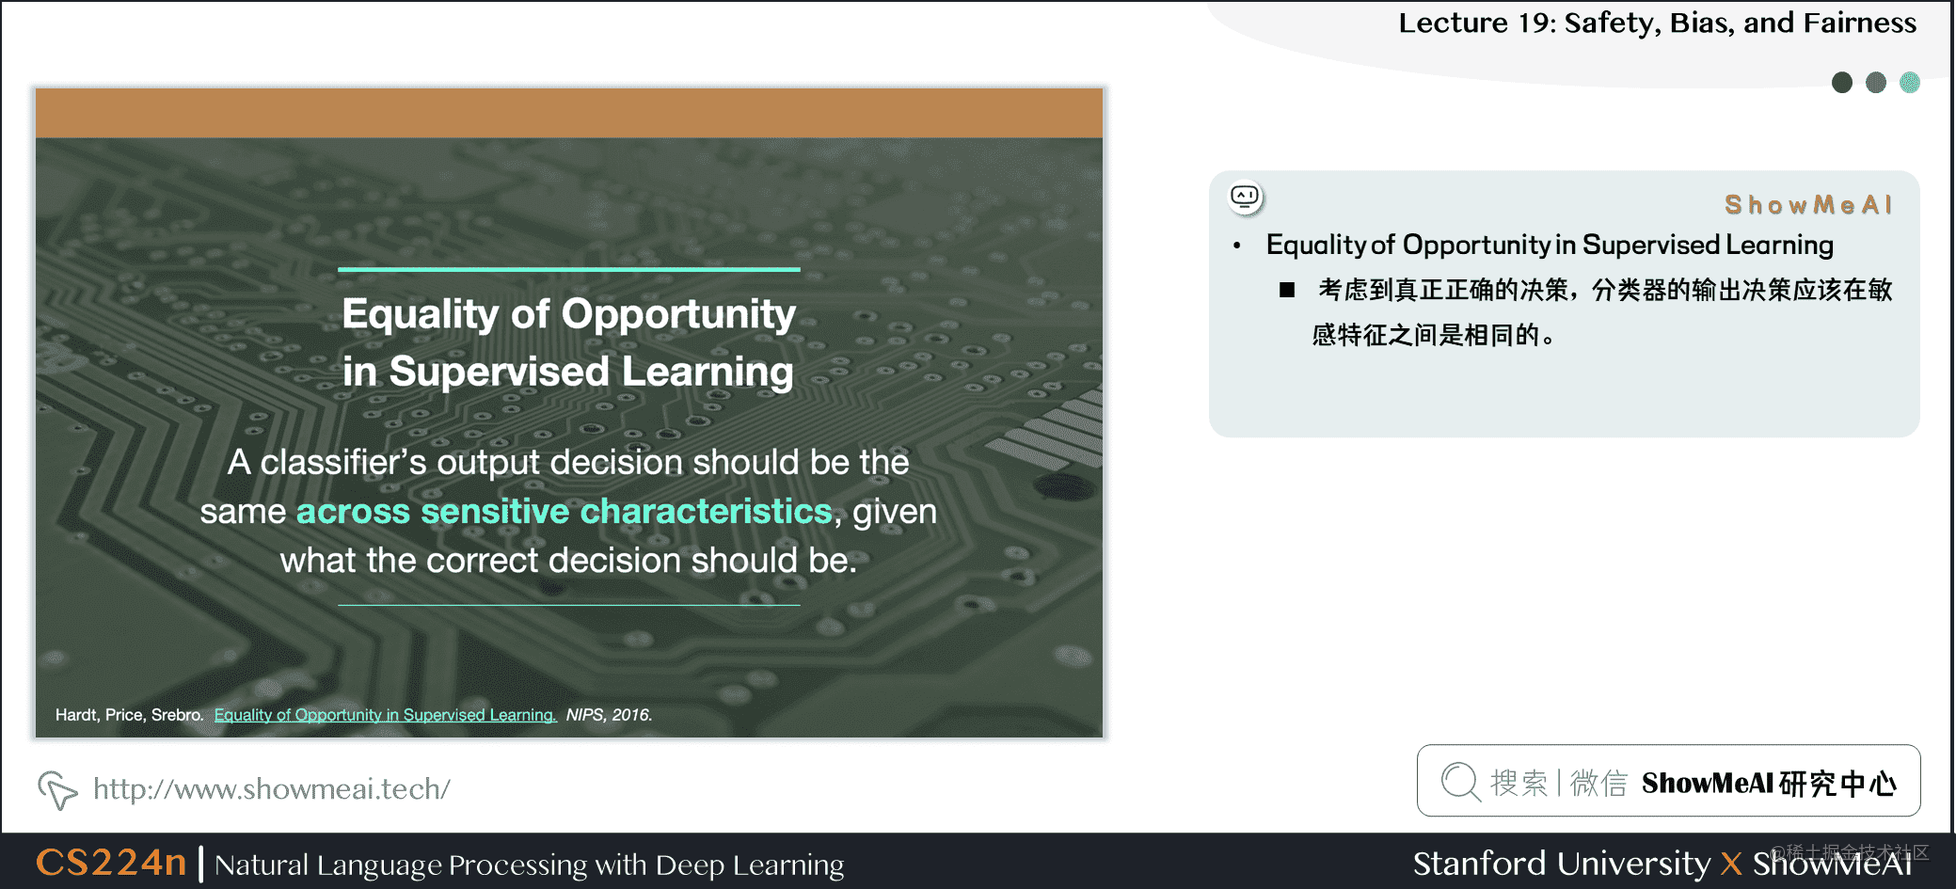 Equality of Opportunity in Supervised Learning